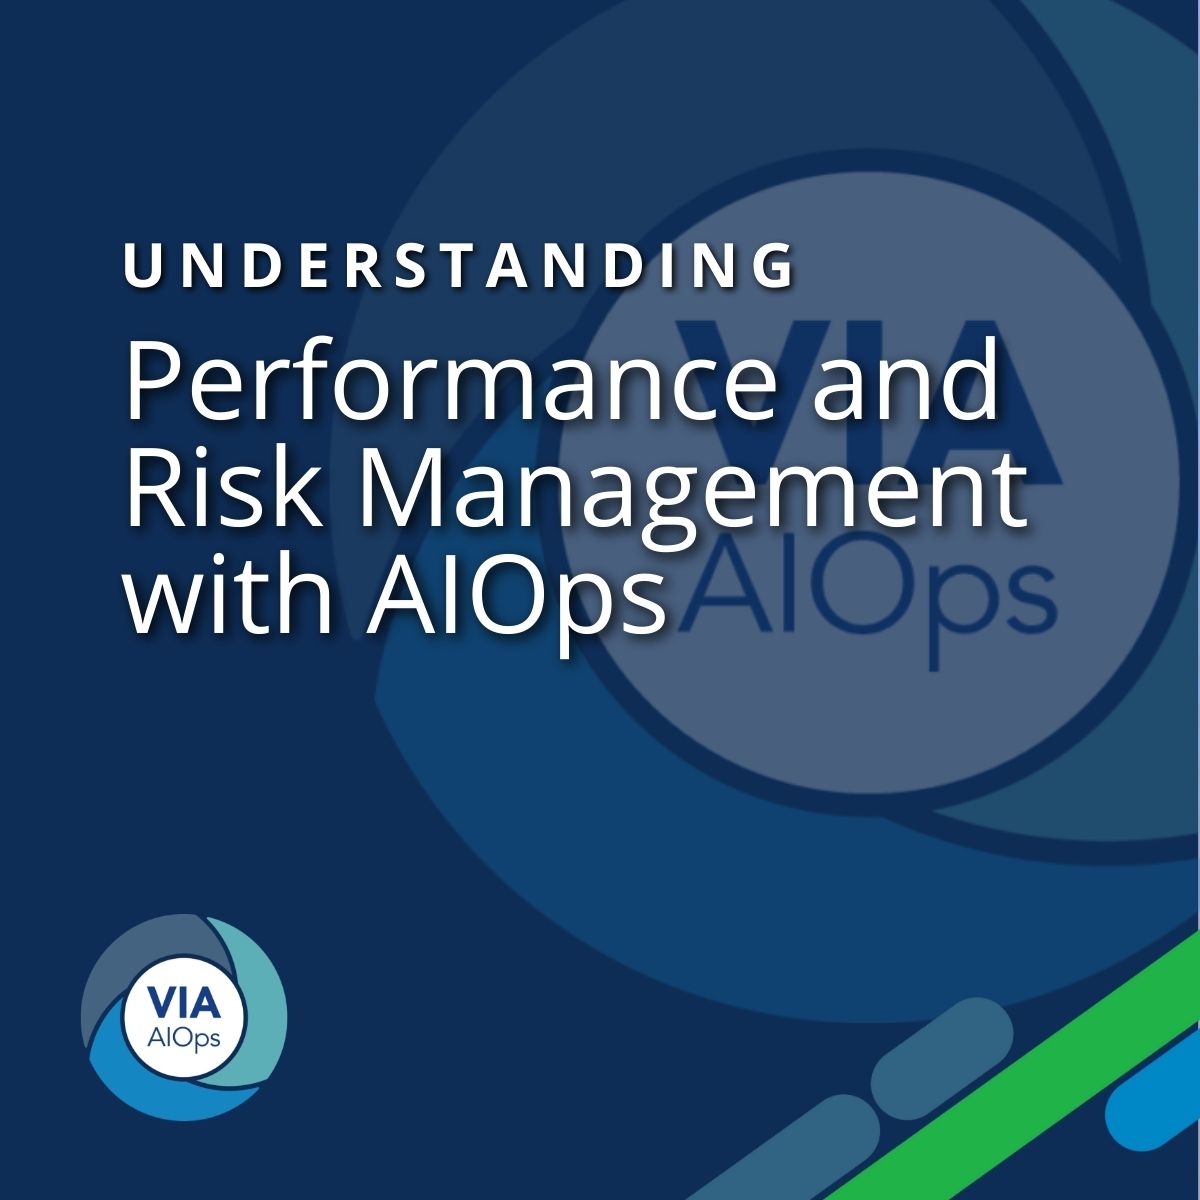 Performance and risk management with AIOps